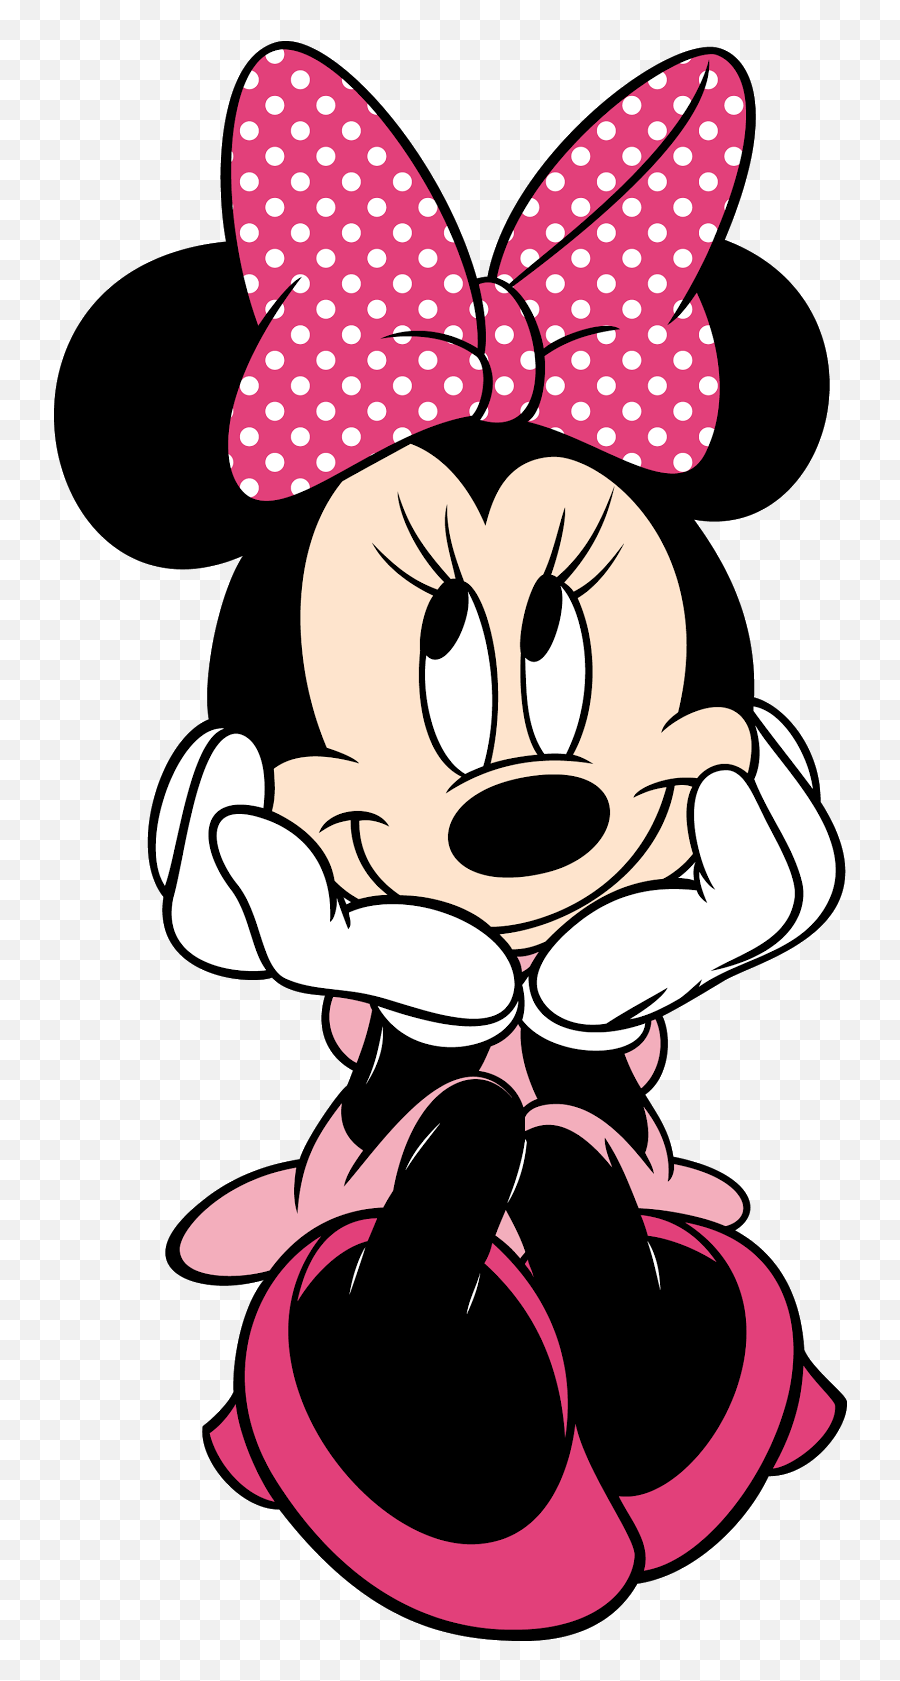 Minnie Mouse Png Transparent Images Minnie Mouse Mickey Mouse Minnie Mouse Transparent Free Transparent Png Images Pngaaa Com